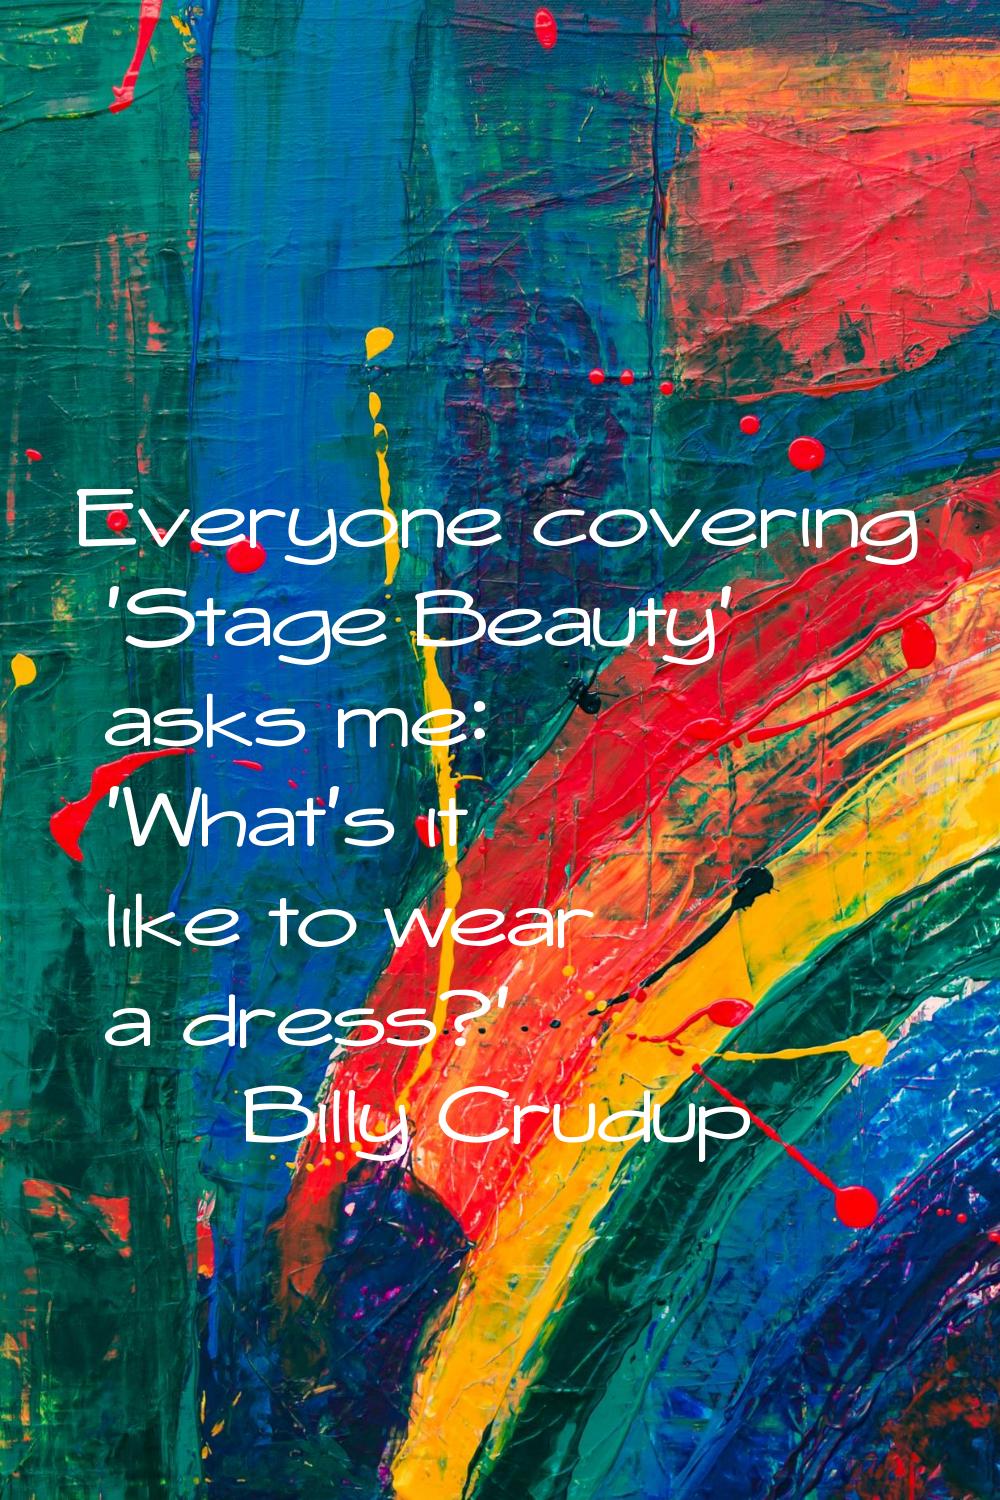 Everyone covering 'Stage Beauty' asks me: 'What's it like to wear a dress?'